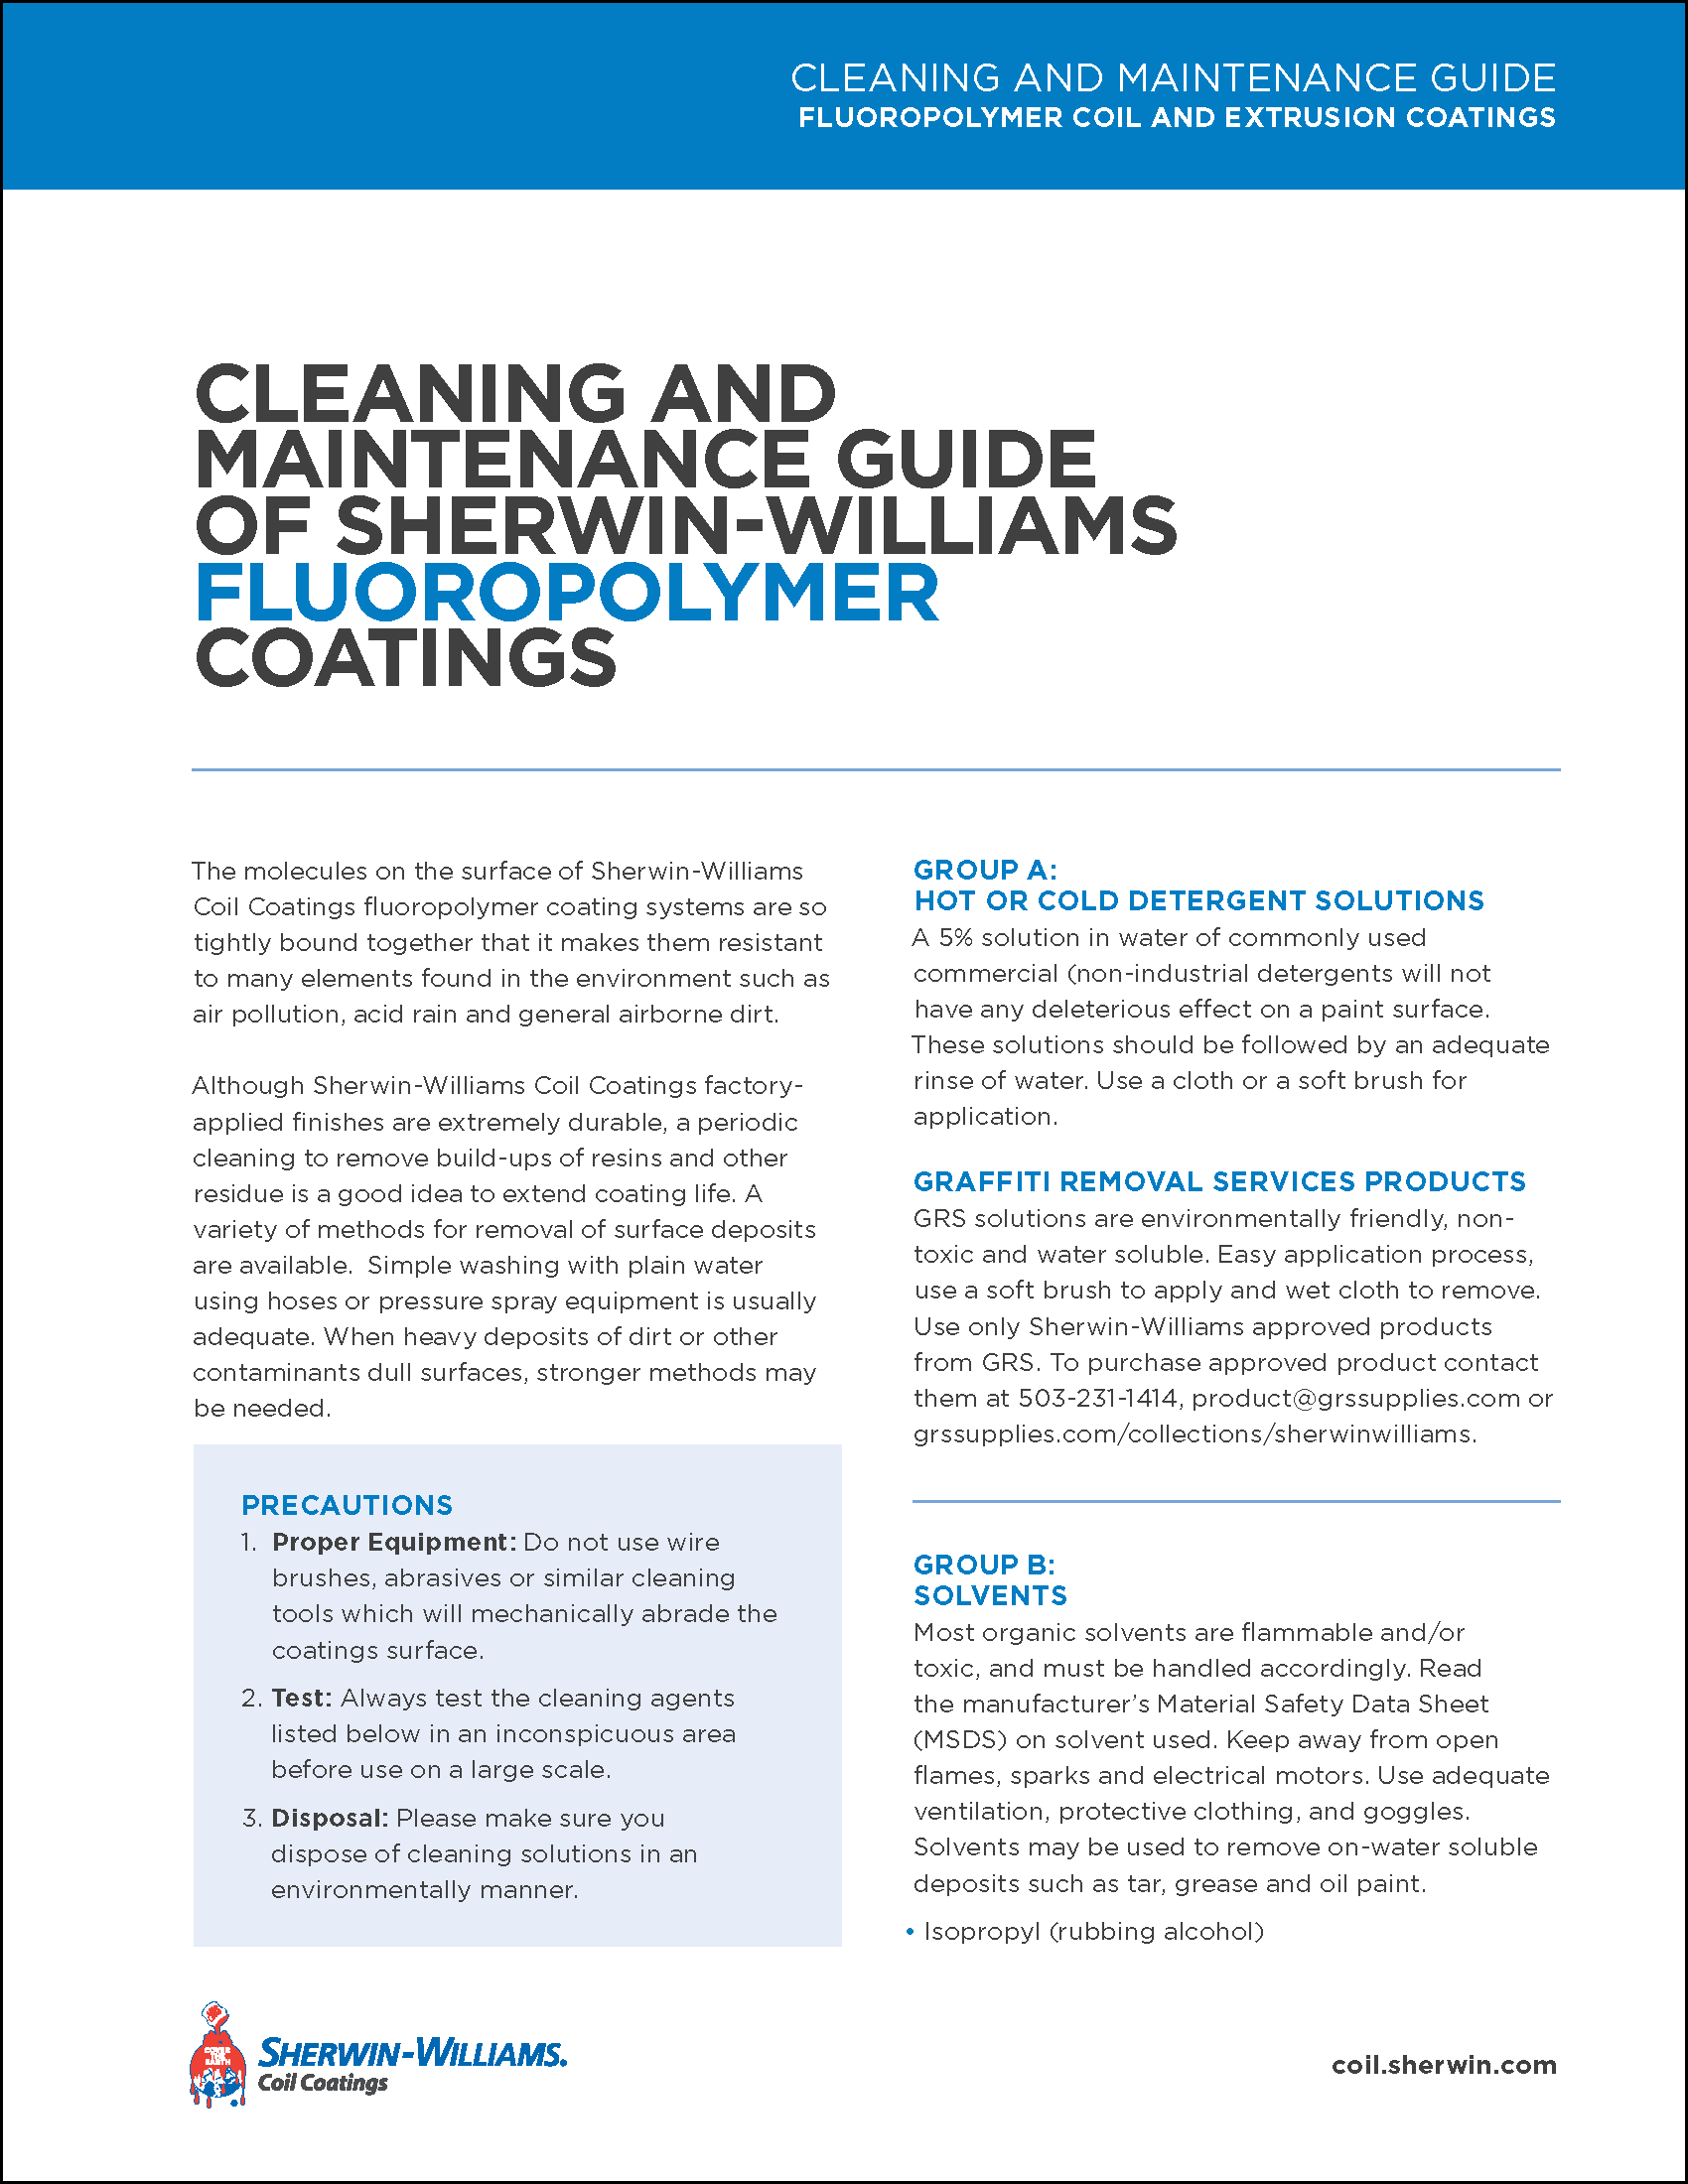 Cleaning And Maintenance Guide Of Sherwin Williams Fluoropolymer Coatings